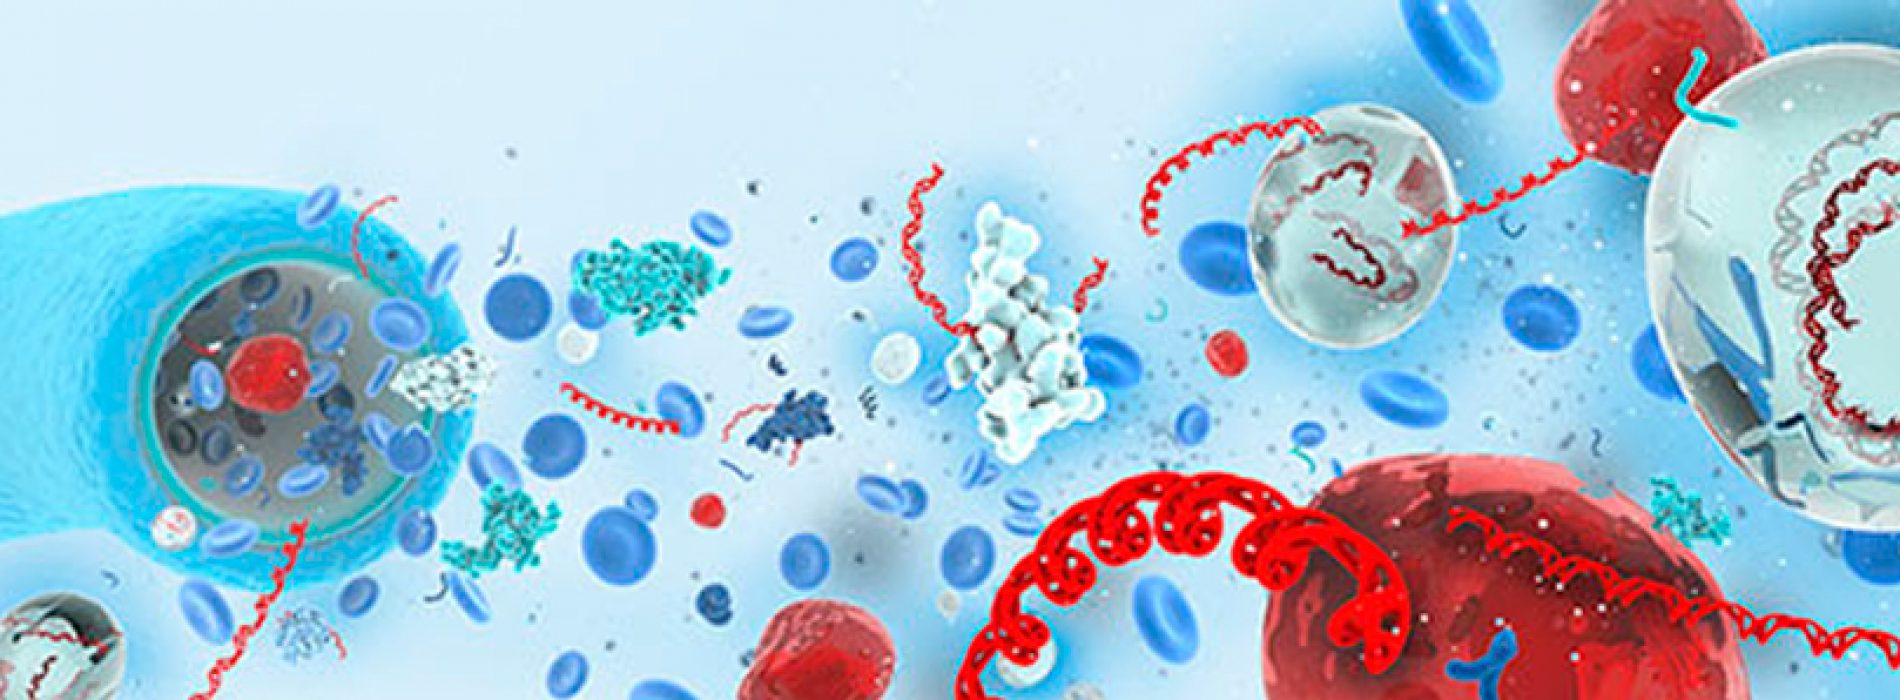 Attend the webinar series: Overcoming Circulating DNA Challenges